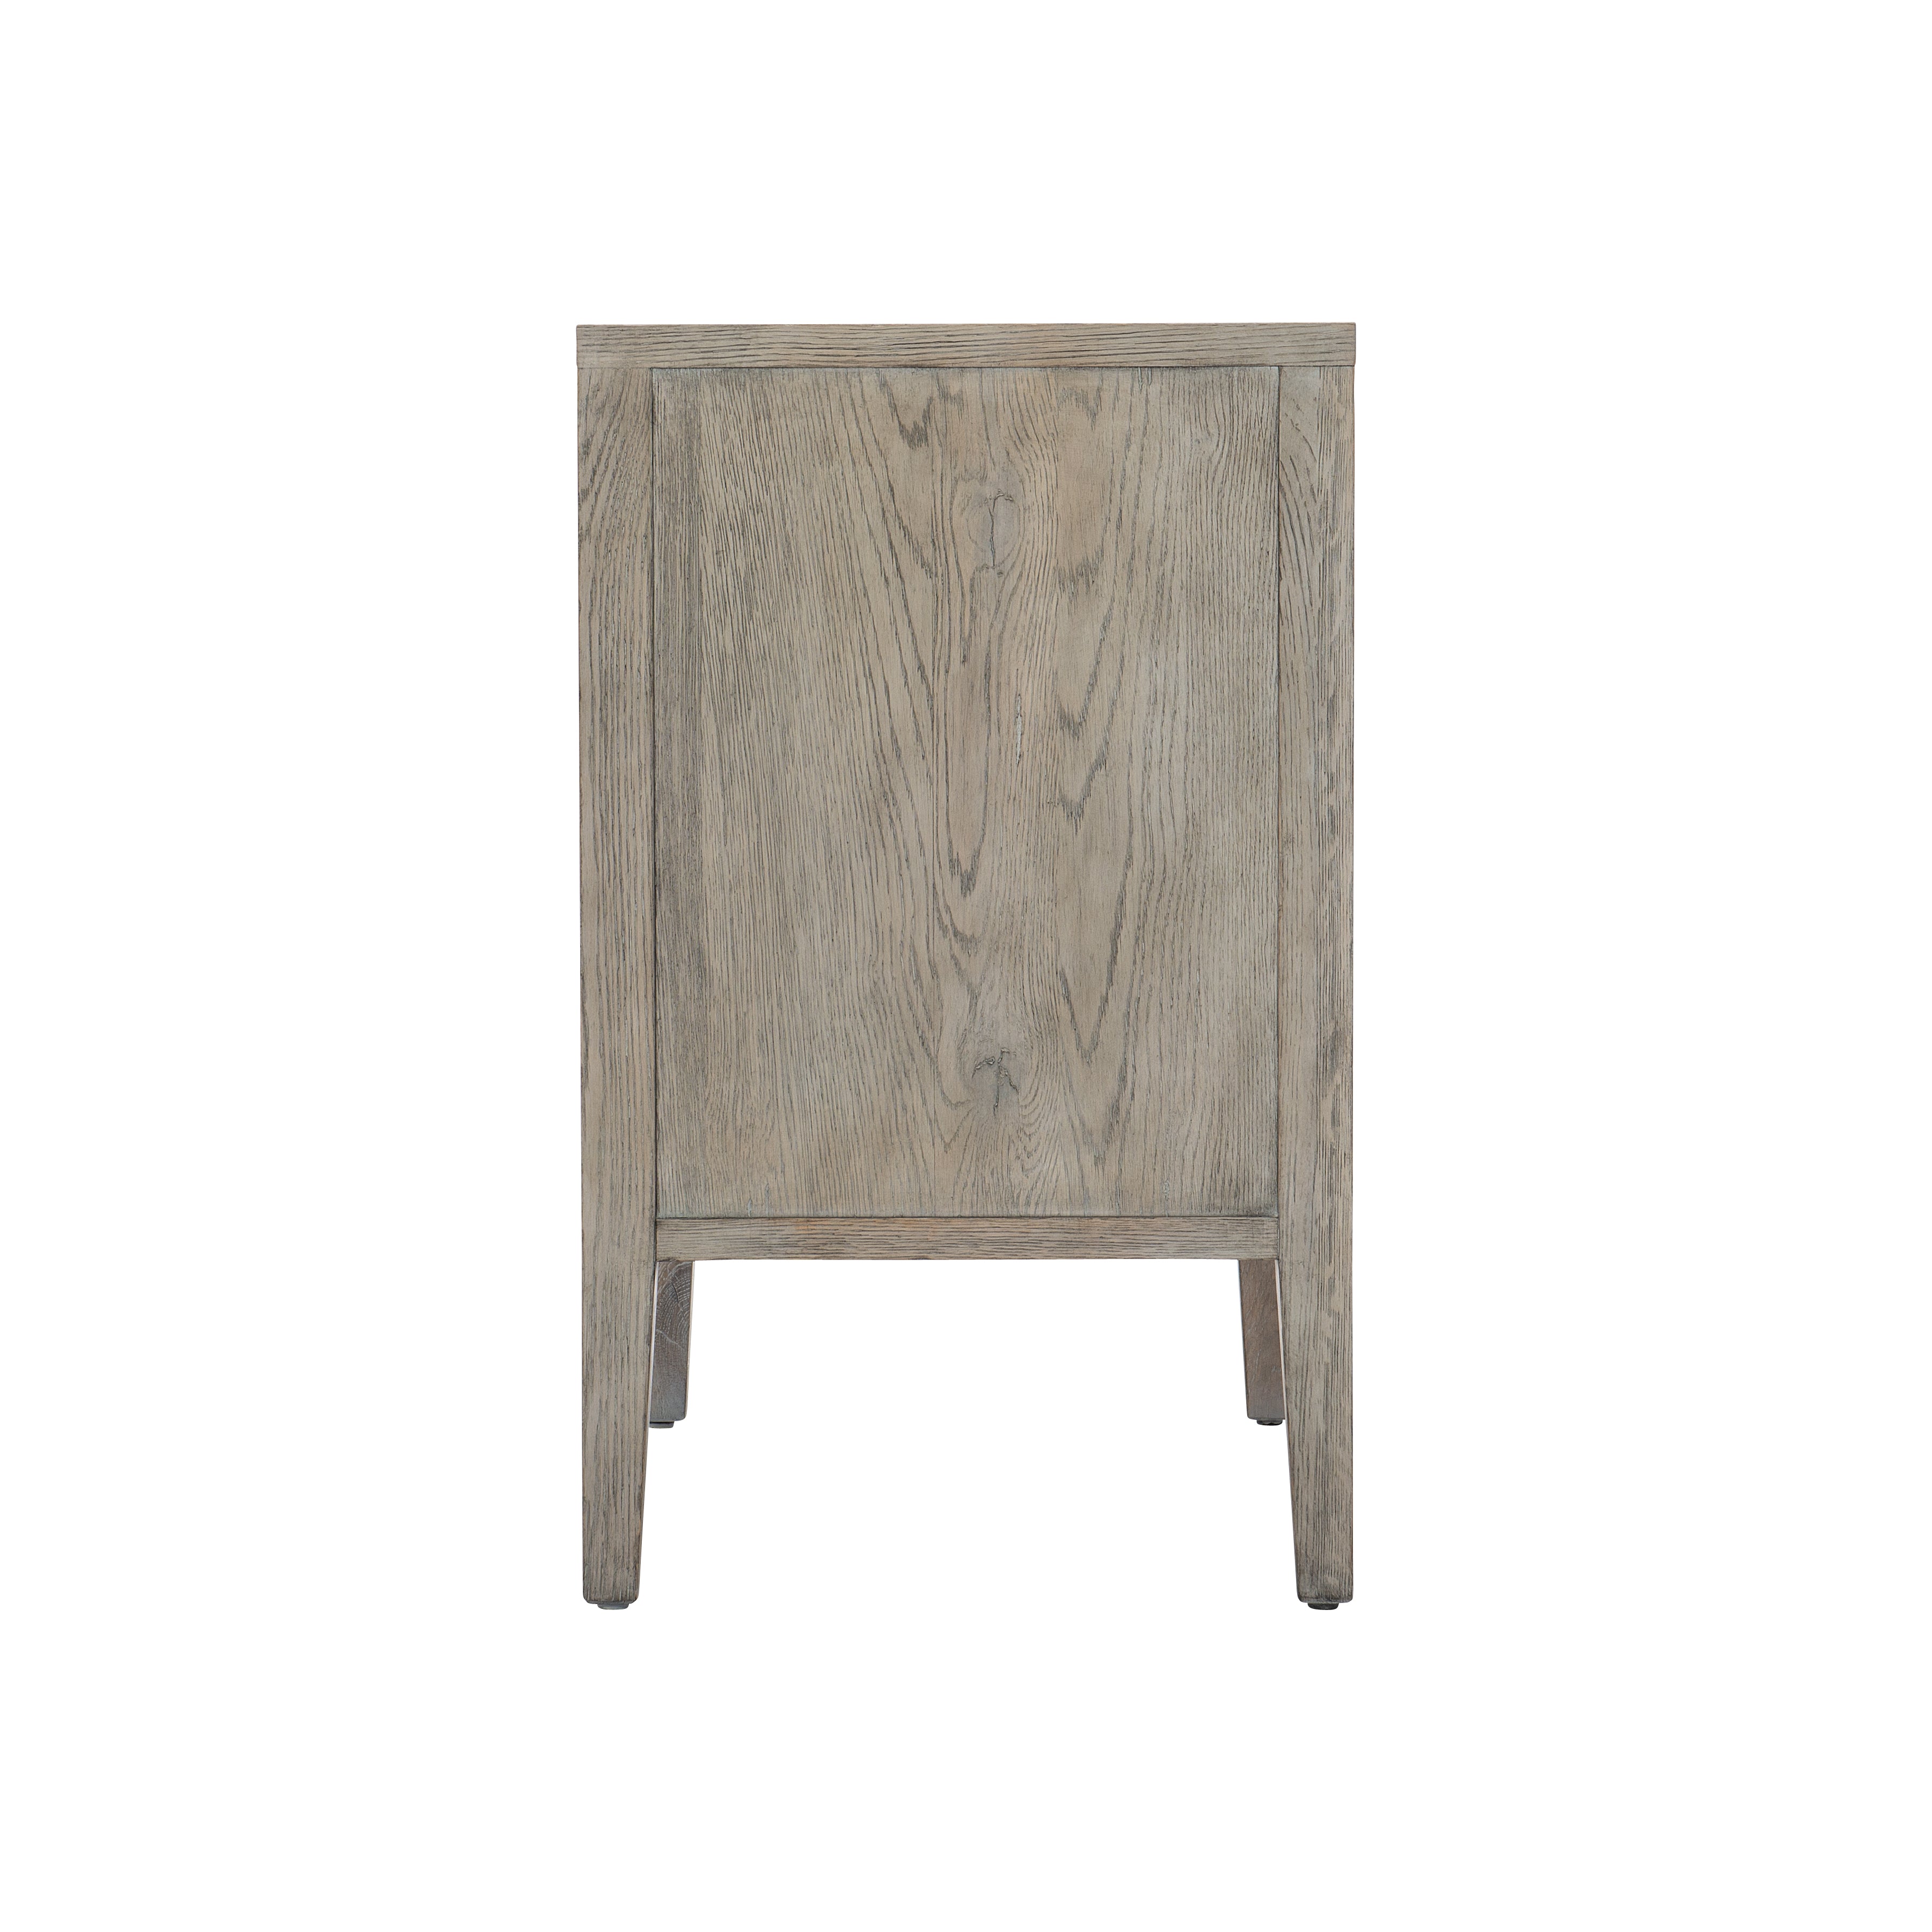 Albion Nightstand (30 inch)